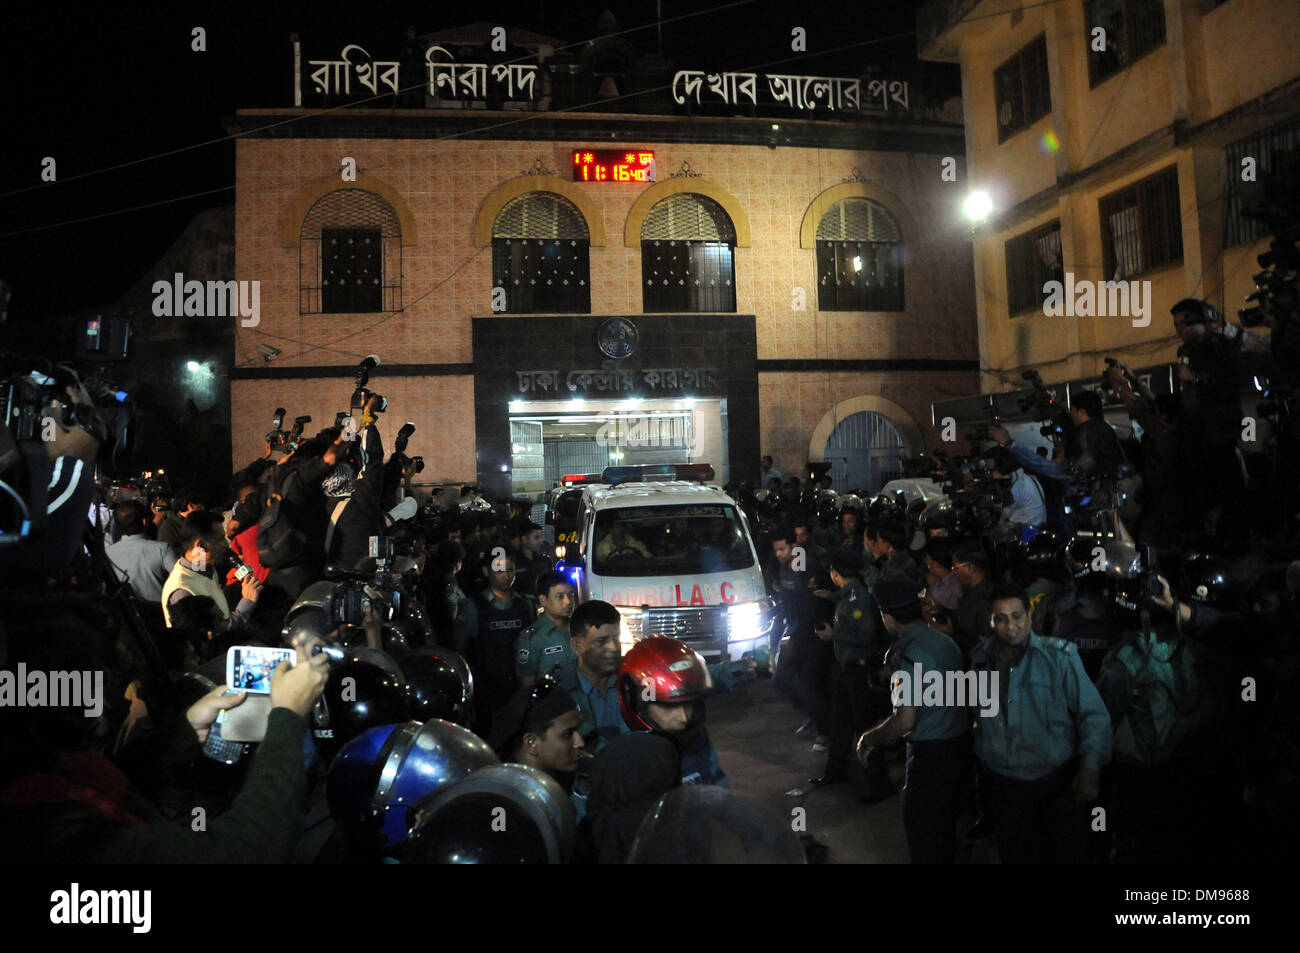 Dhaka, Bangladesh. 12th Dec, 2013. Body of Abdul Quader Molla who is a leader of Bangladesh Jamaat-e-Islami Party is carried by an ambulance after the death sentence in Dhaka, Bangladesh, Dec. 12, 2013. Bangladesh has executed Abdul Quader Molla, an Islamist party leader convicted of war crimes in 1971, which is the first execution of a war criminal in the country. In protest against Molla's execution, his party Jamaat called countrywide dawn-to-dusk general strike for Sunday. Credit:  Shariful Islam/Xinhua/Alamy Live News Stock Photo